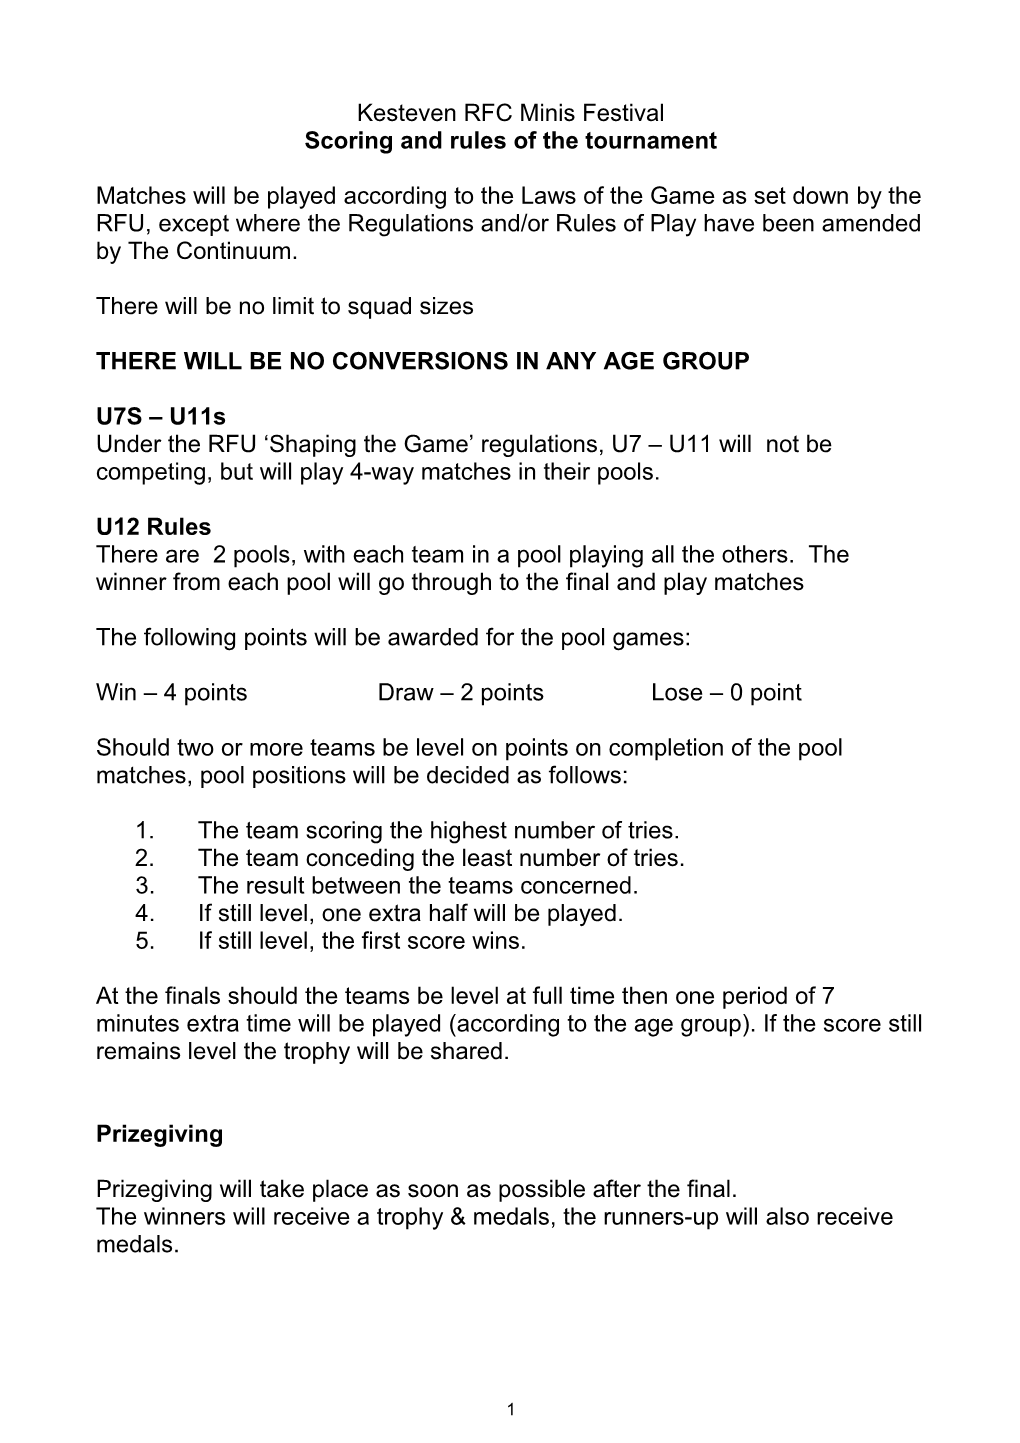 Scoring and Rules of the Tournament